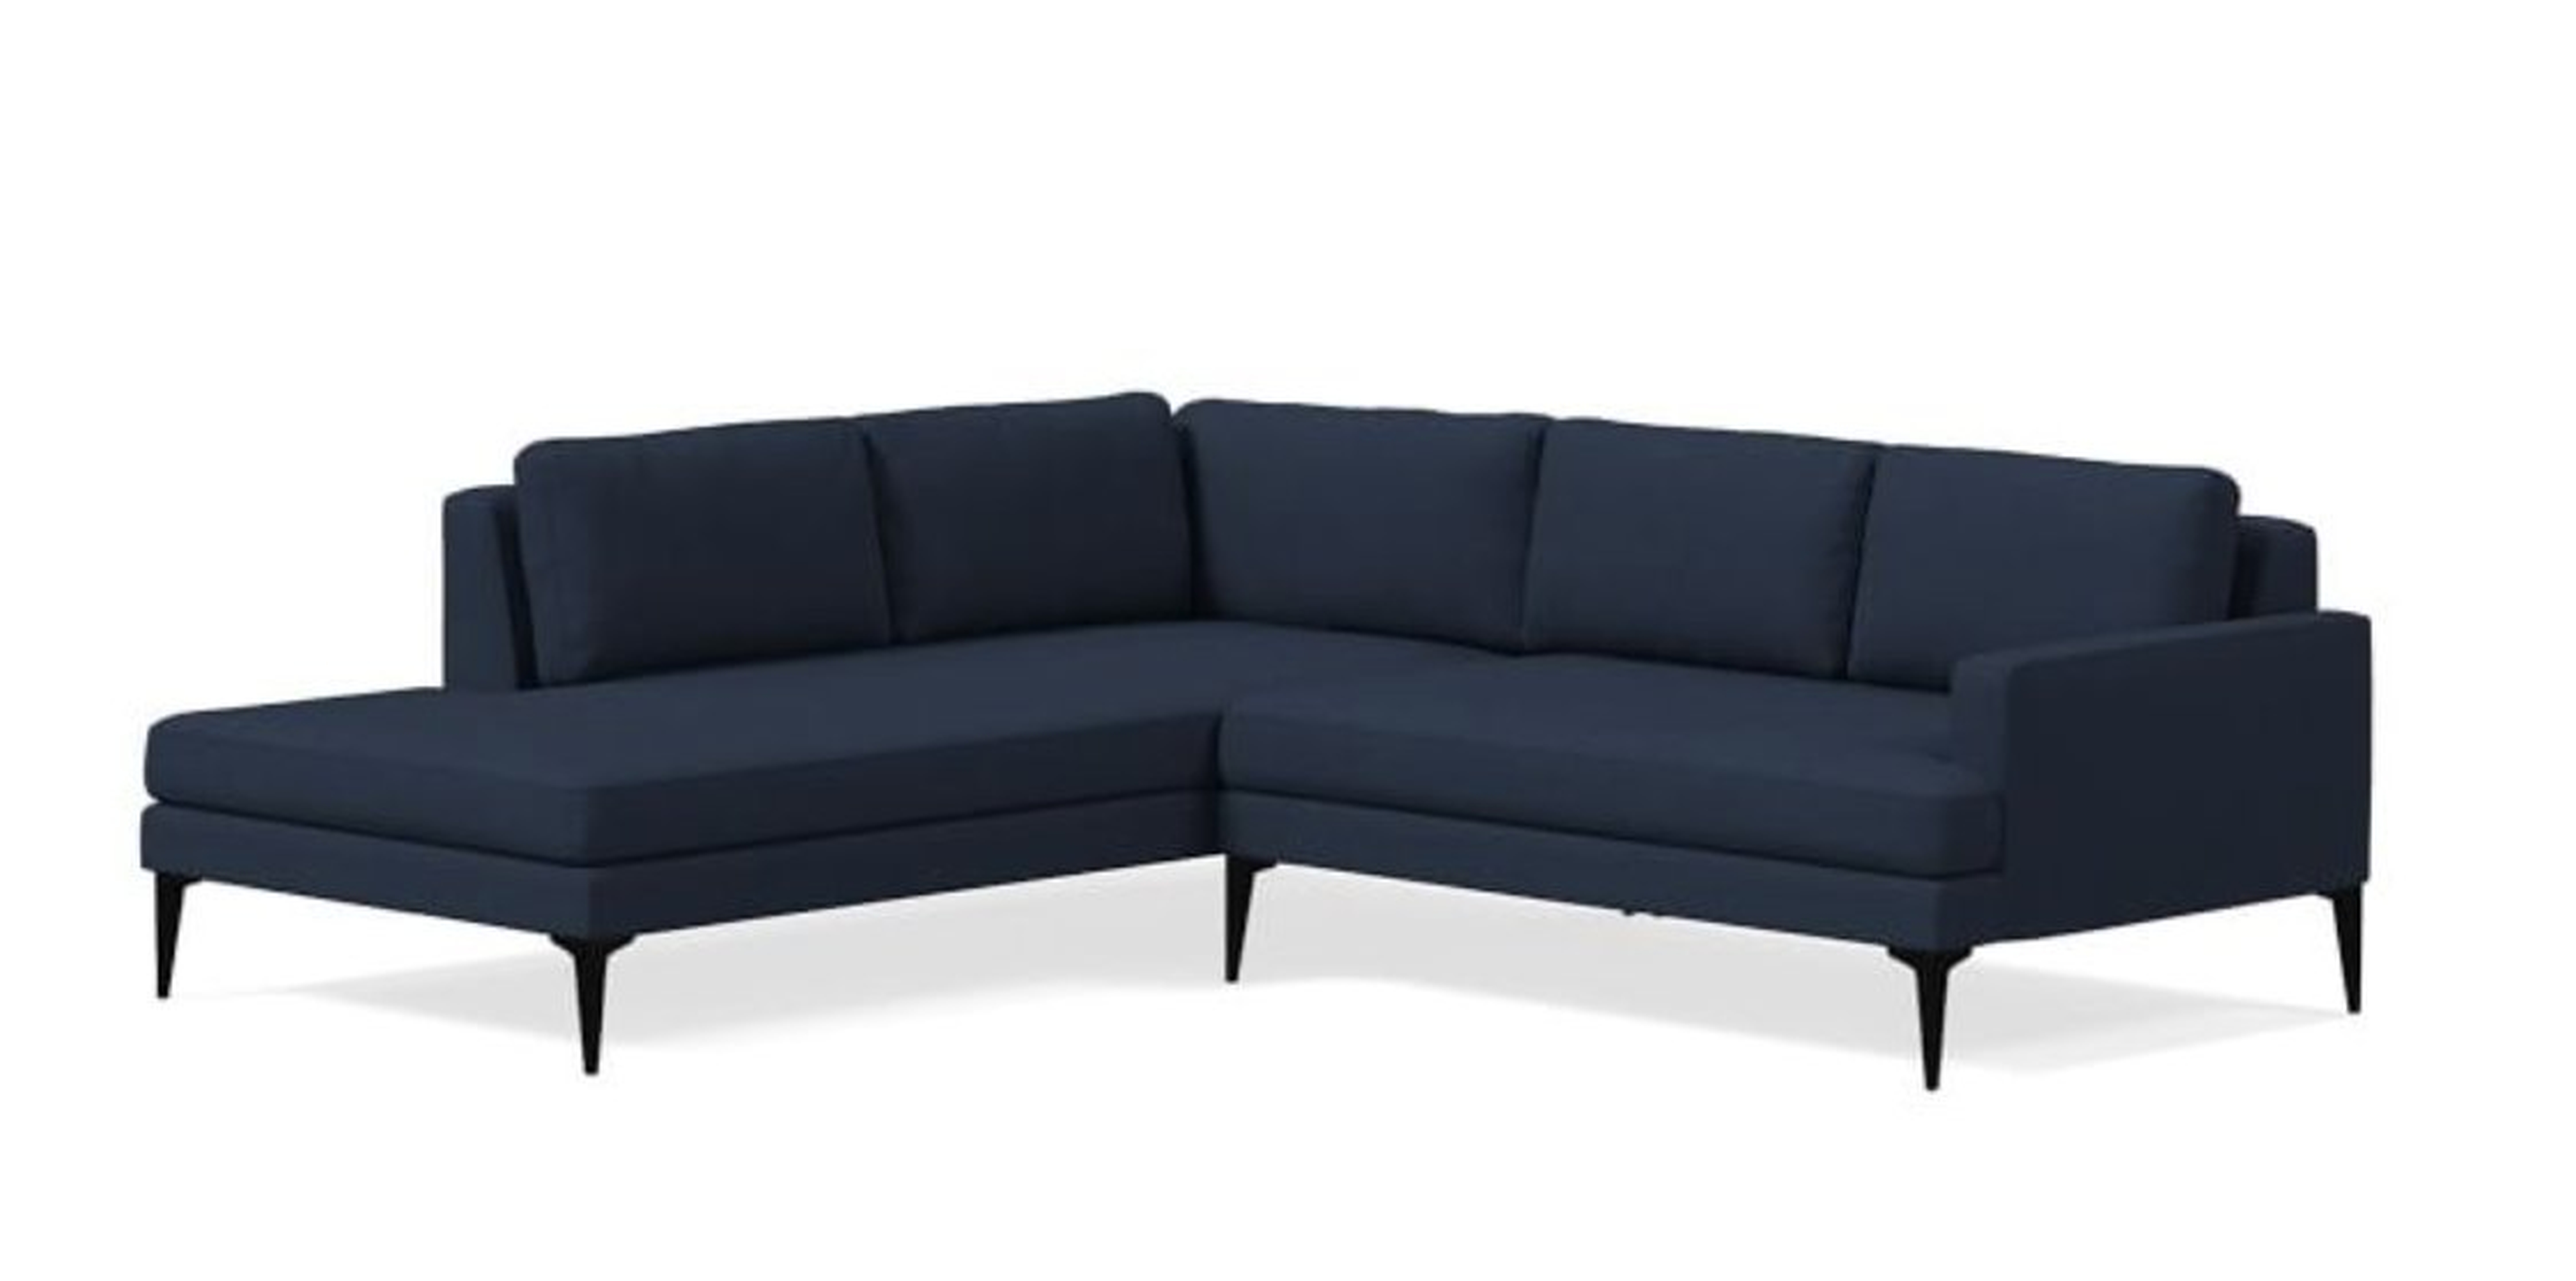 Andes Set 16: Right Arm 2 Seater, Left Arm Terminal Chaise, Twill, Regal Blue, Dark Pewter - West Elm